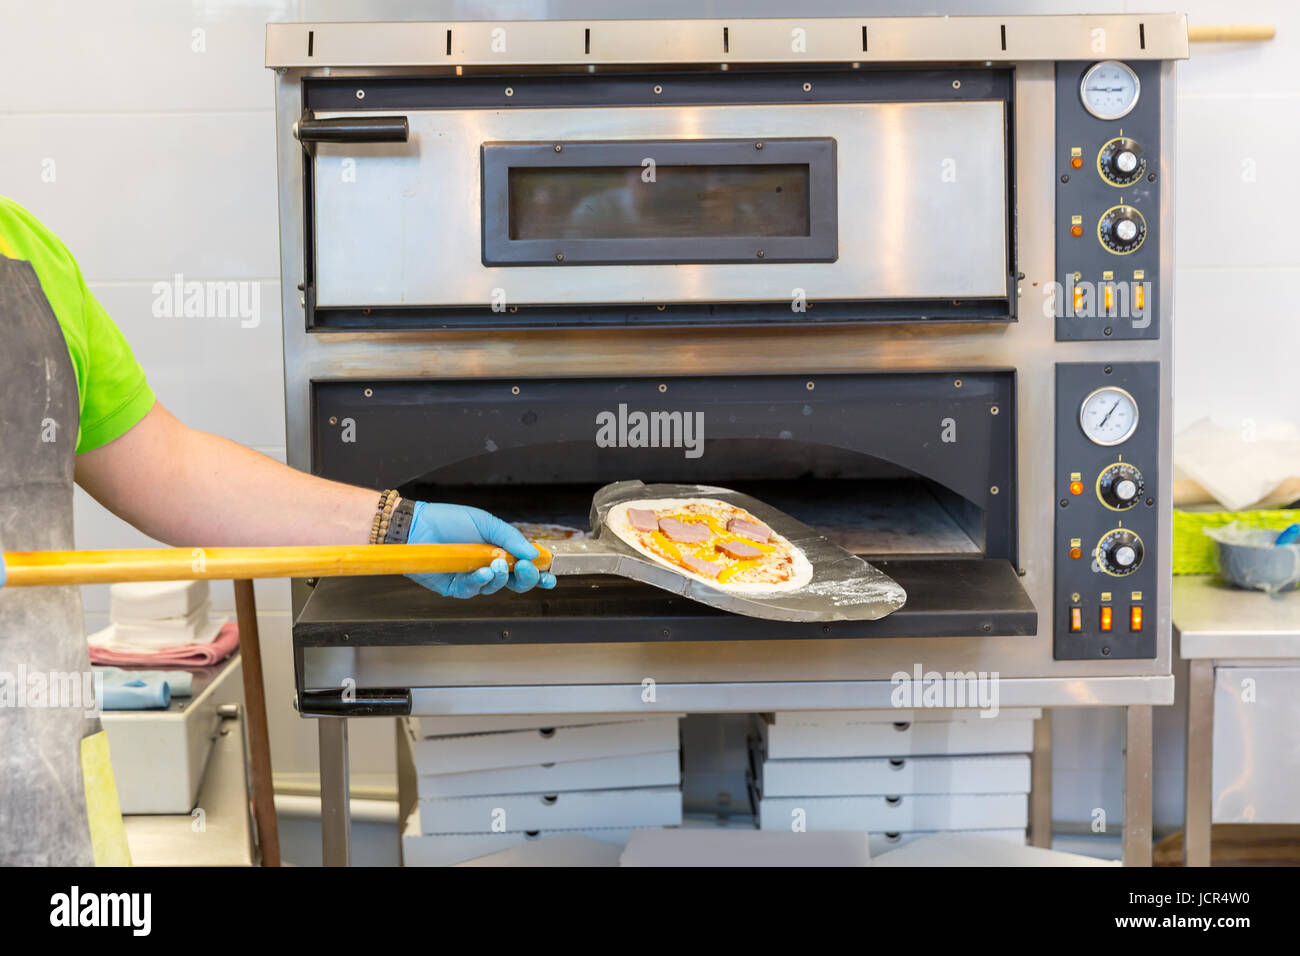 Baker hands with shovel, cooking pizza, electric ovens Stock Photo